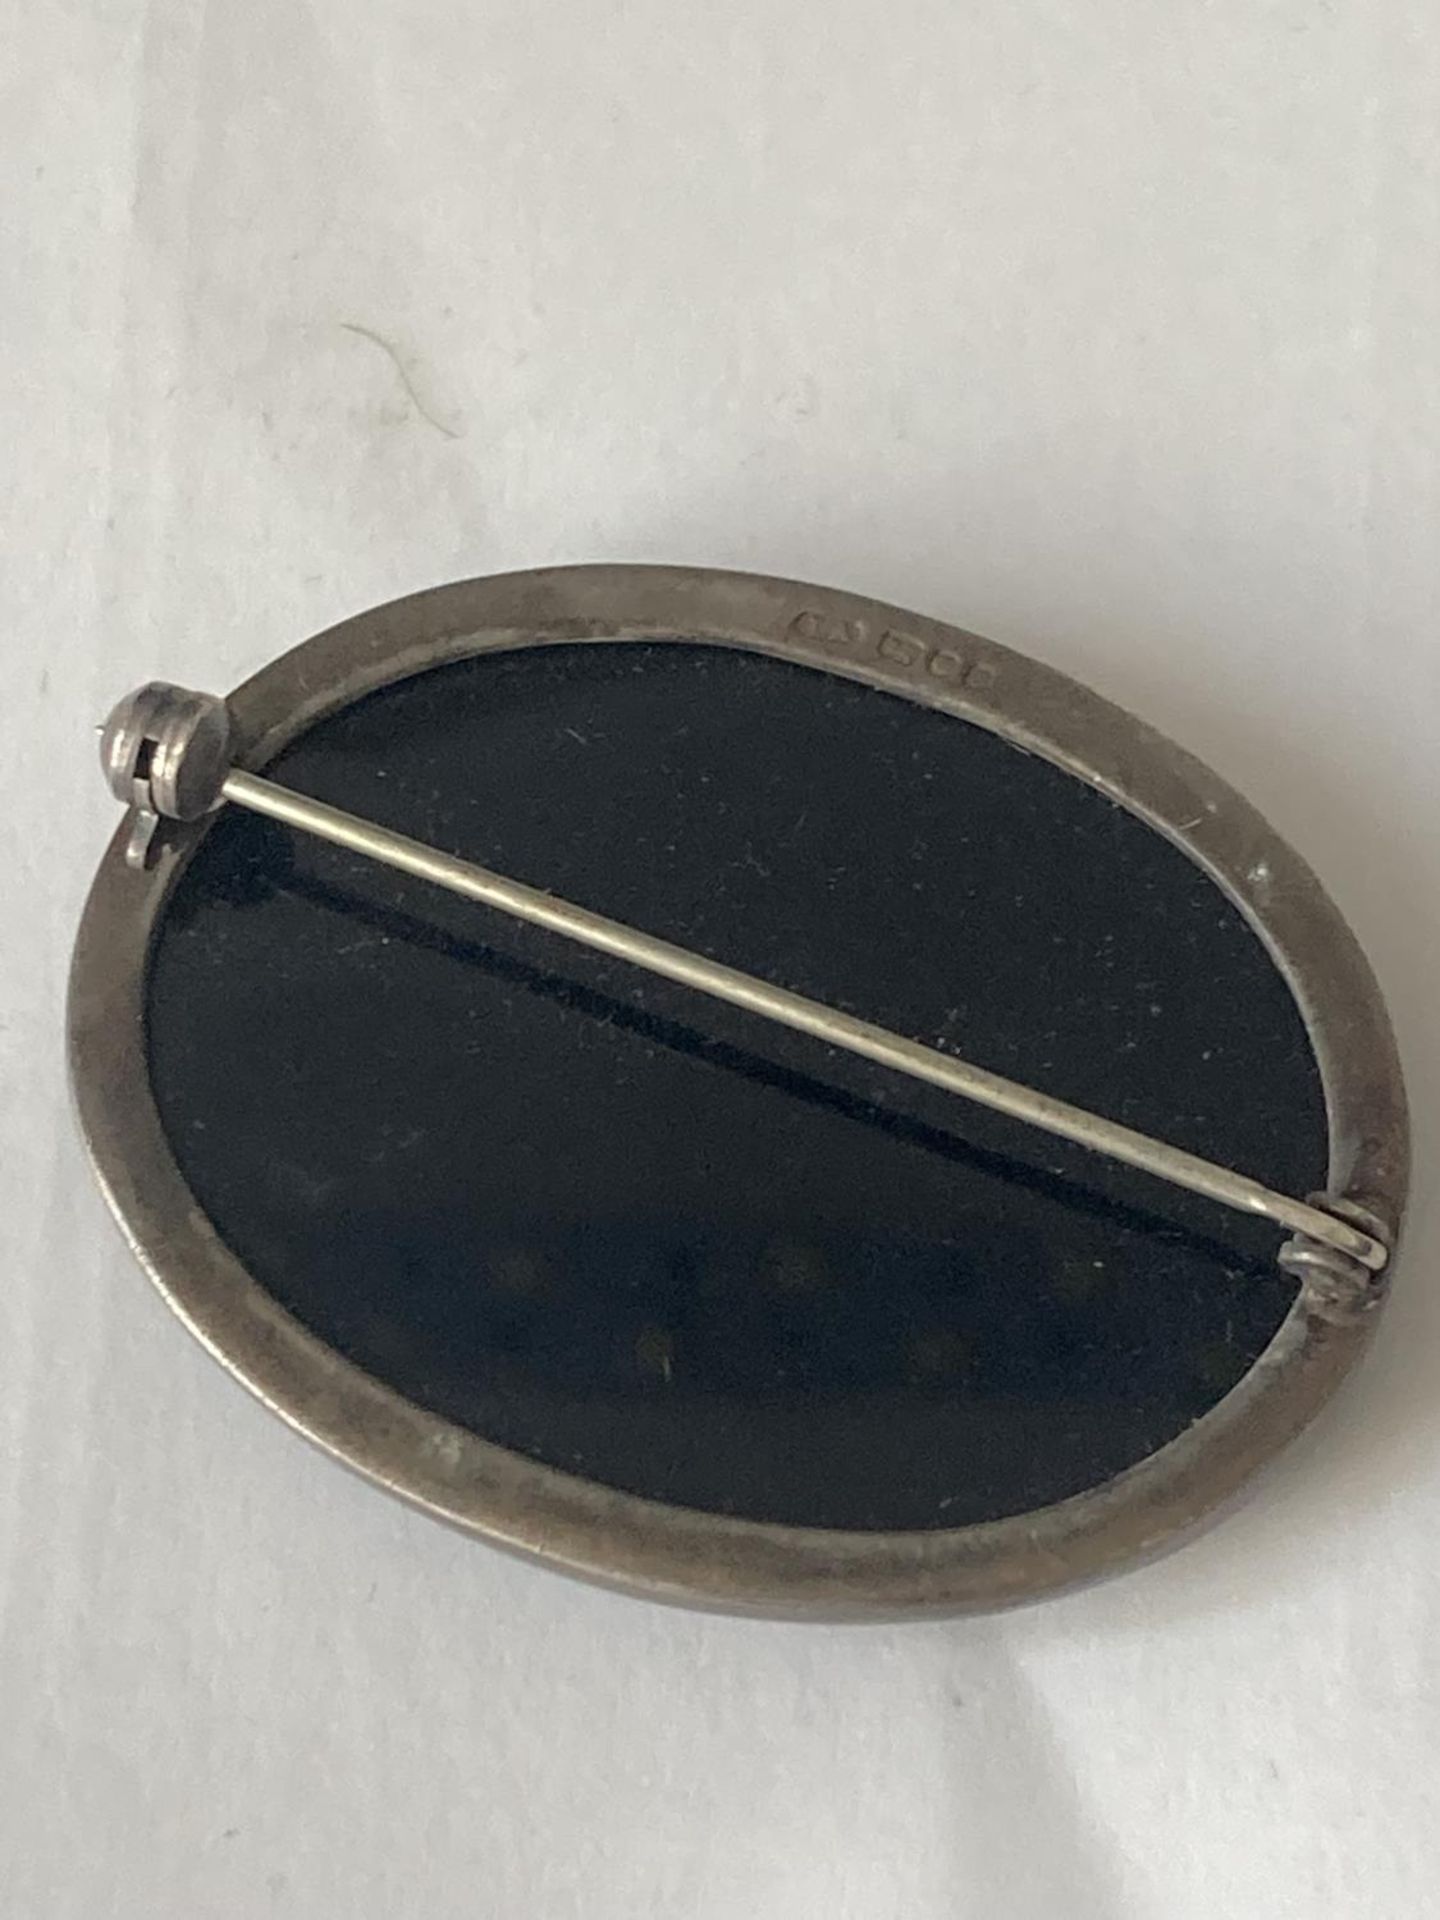 THREE SILVER ITEMS TO INCLUDE TWO RINGS AND A VINTAGE BLACK STONE BROOCH - Image 8 of 10